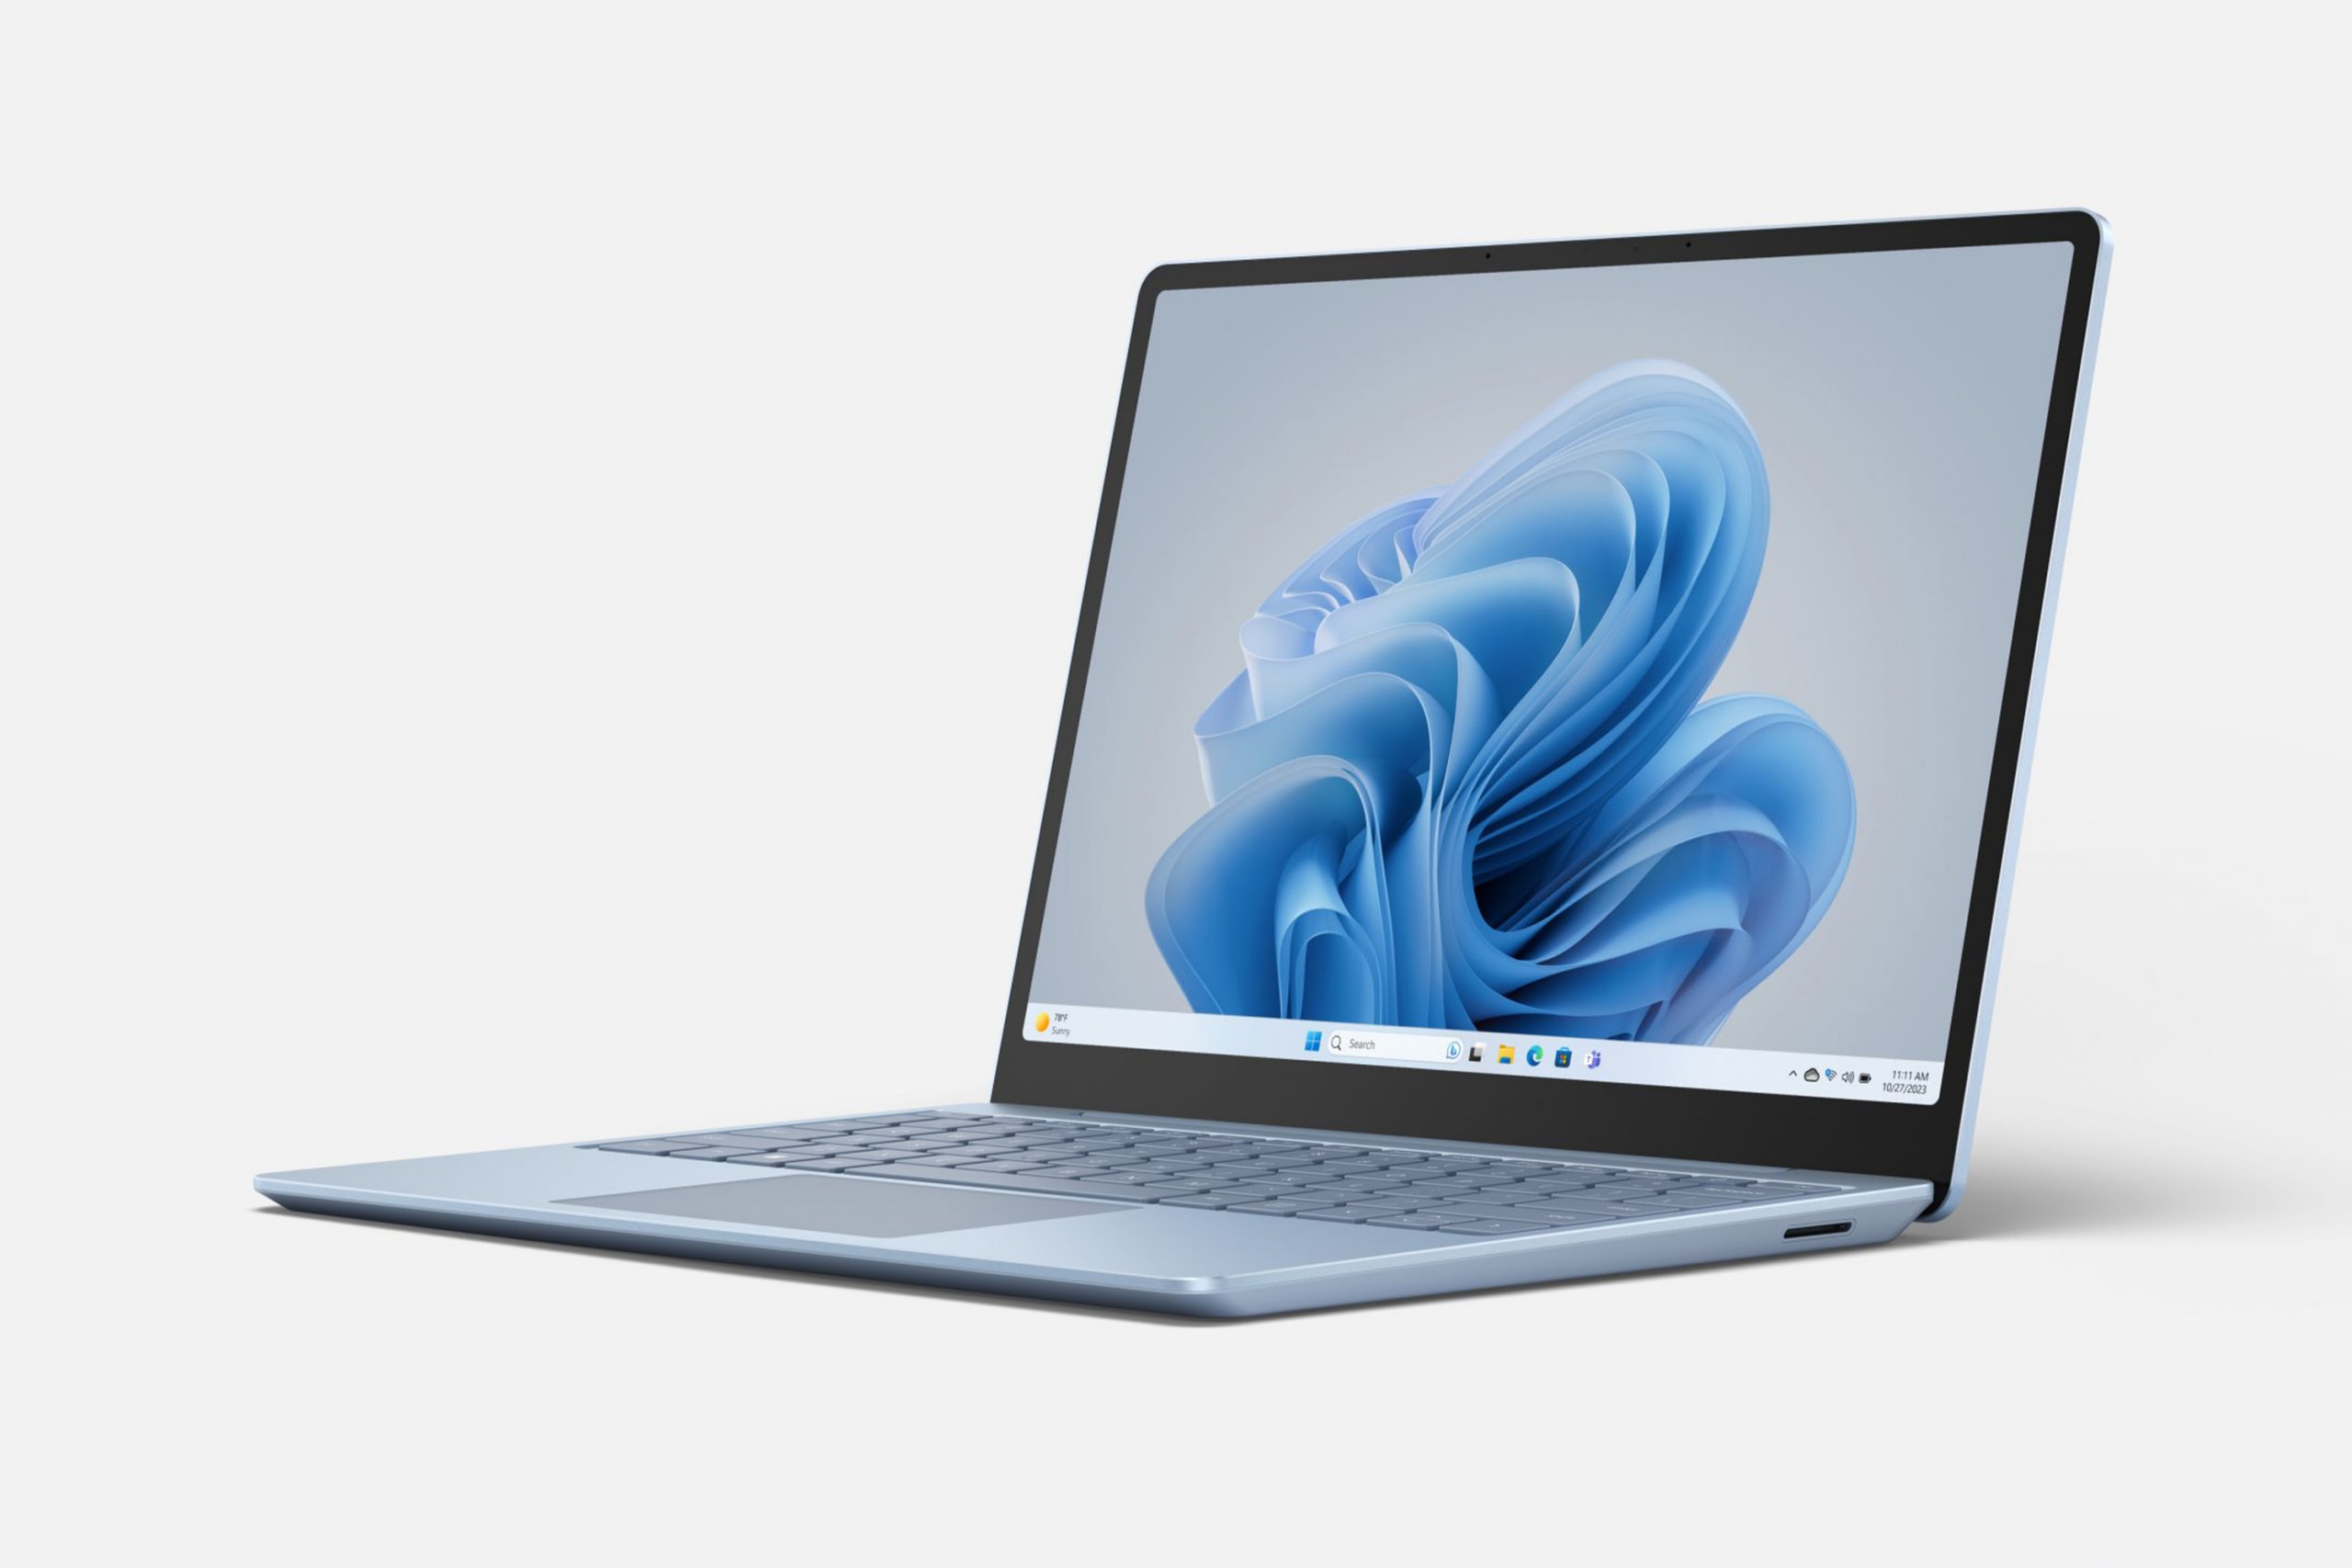 Microsoft Announces Two New Surface Laptops Personal Computers Apple Macbook Tablet iPad Touchscreen